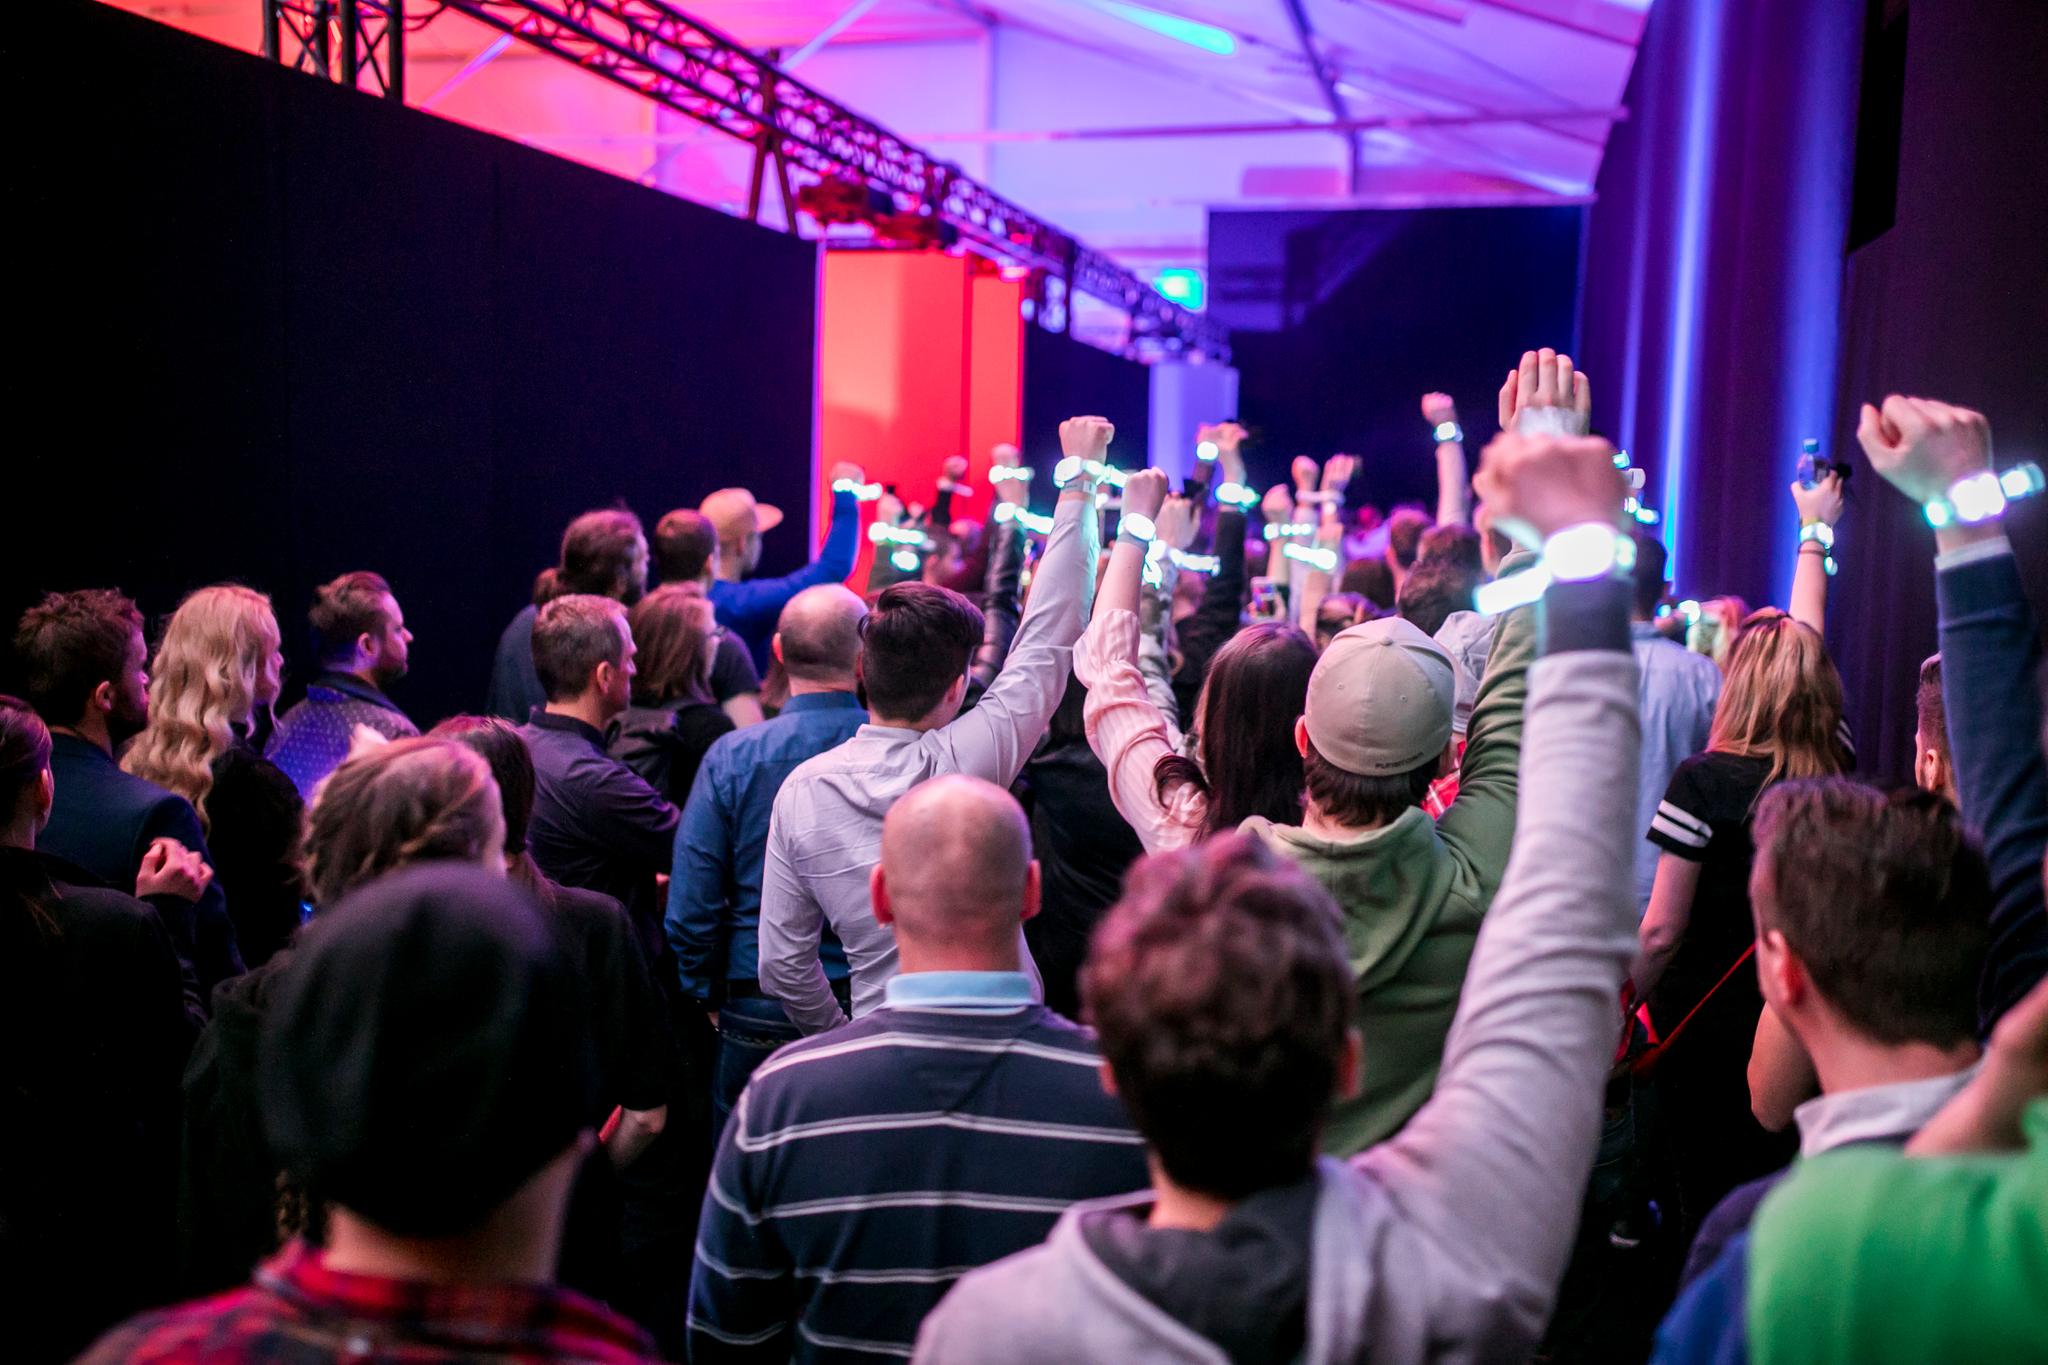 A crowd of people with their backs turned to the camera hoist their fists into the air- they are all wearing glowing white-blue wristbands. Colorful event lighting and trusses can be seen in the background.